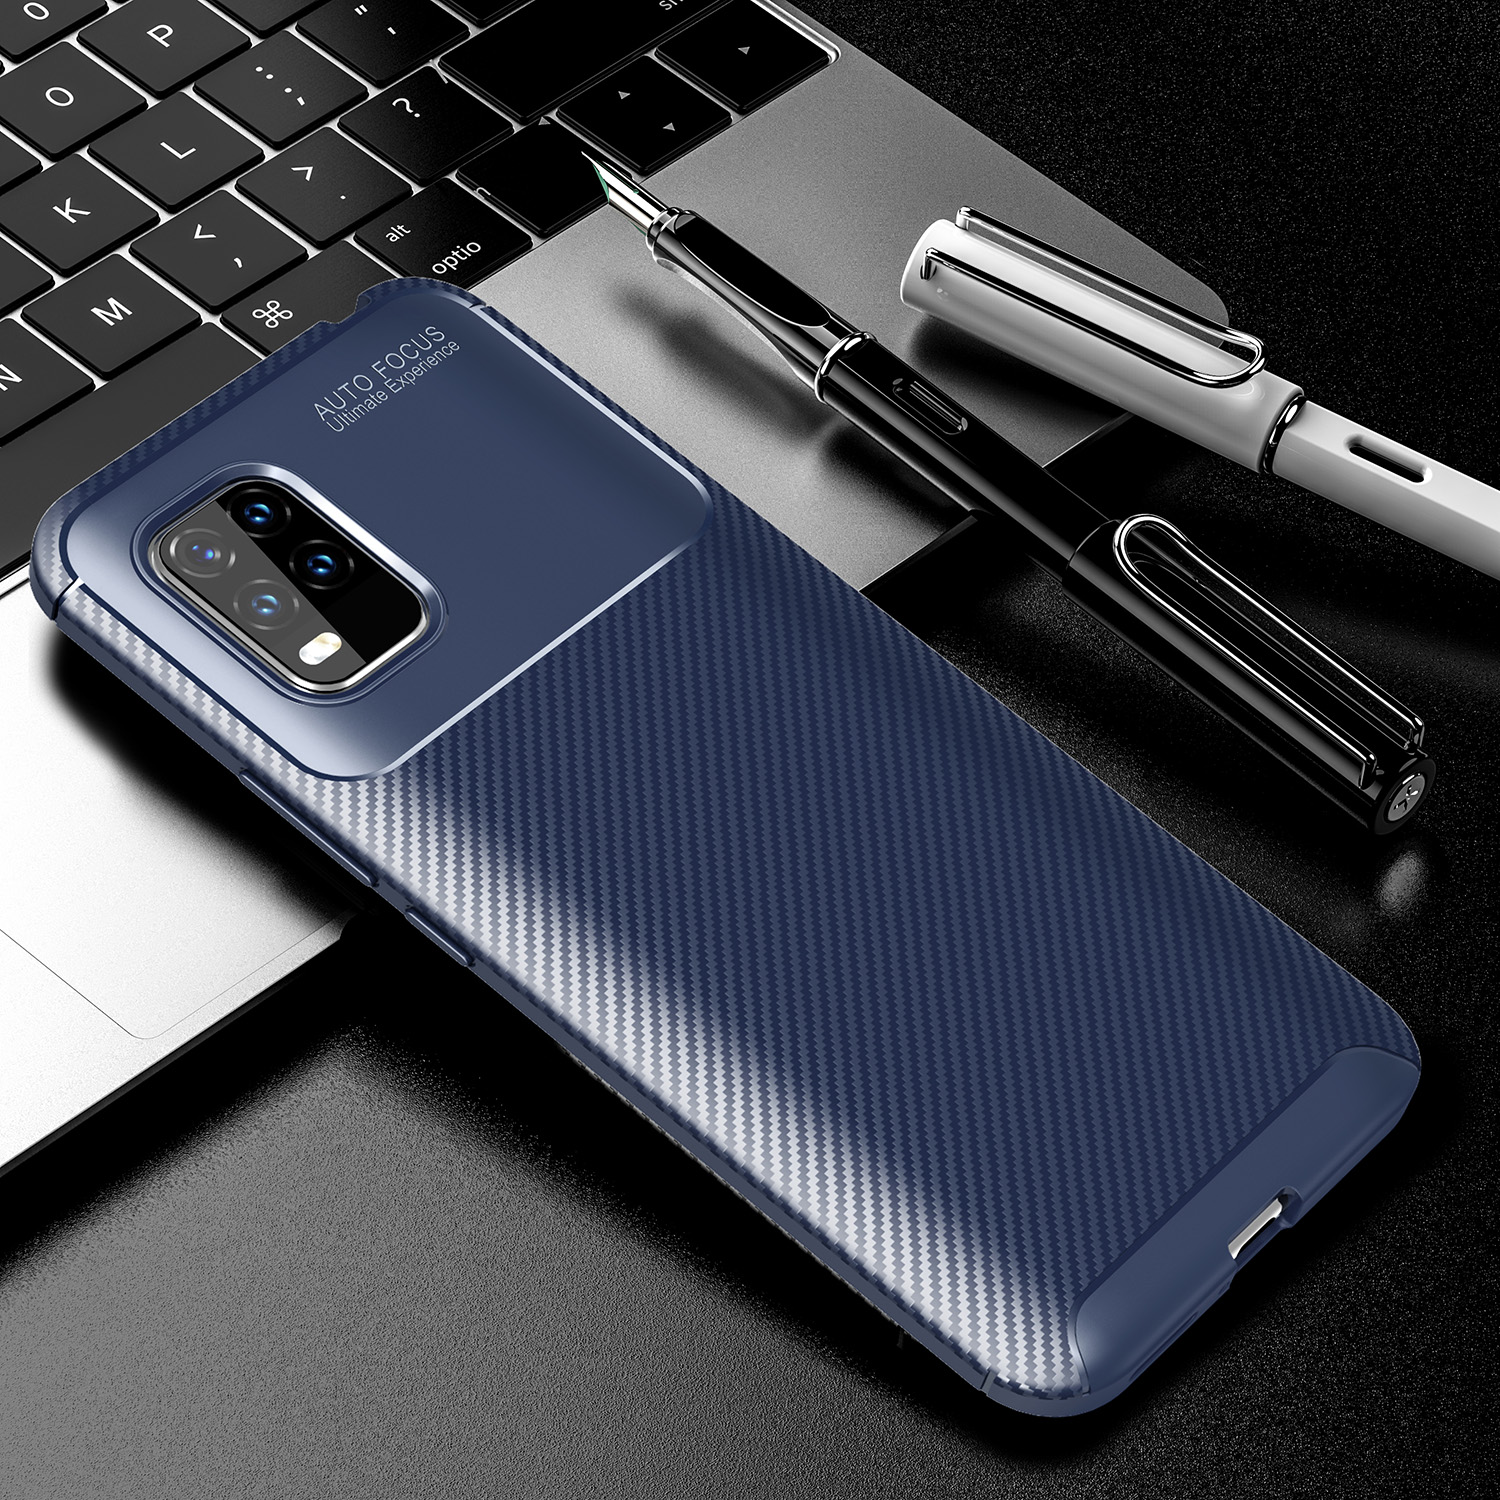 Bakeey for Xiaomi Mi 10 Lite Case Luxury Carbon Fiber Pattern Shockproof Silicone Protective Case Back Cover Non-original